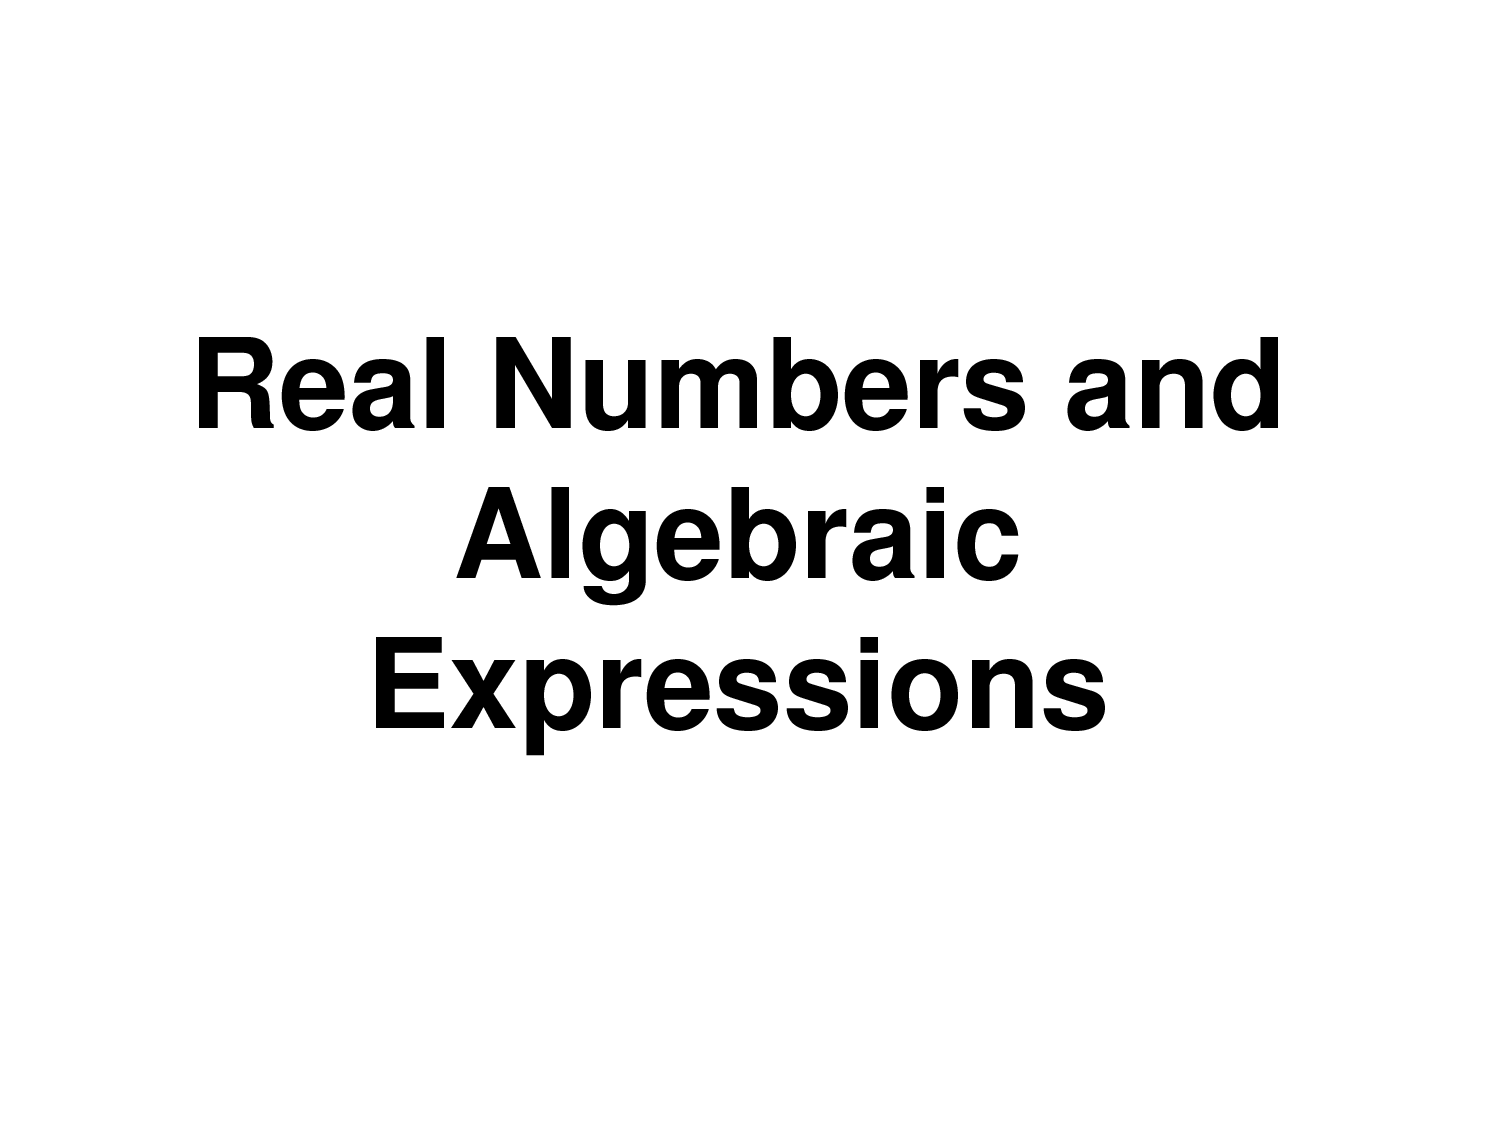 8-best-images-of-subsets-of-real-numbers-worksheet-real-number-system